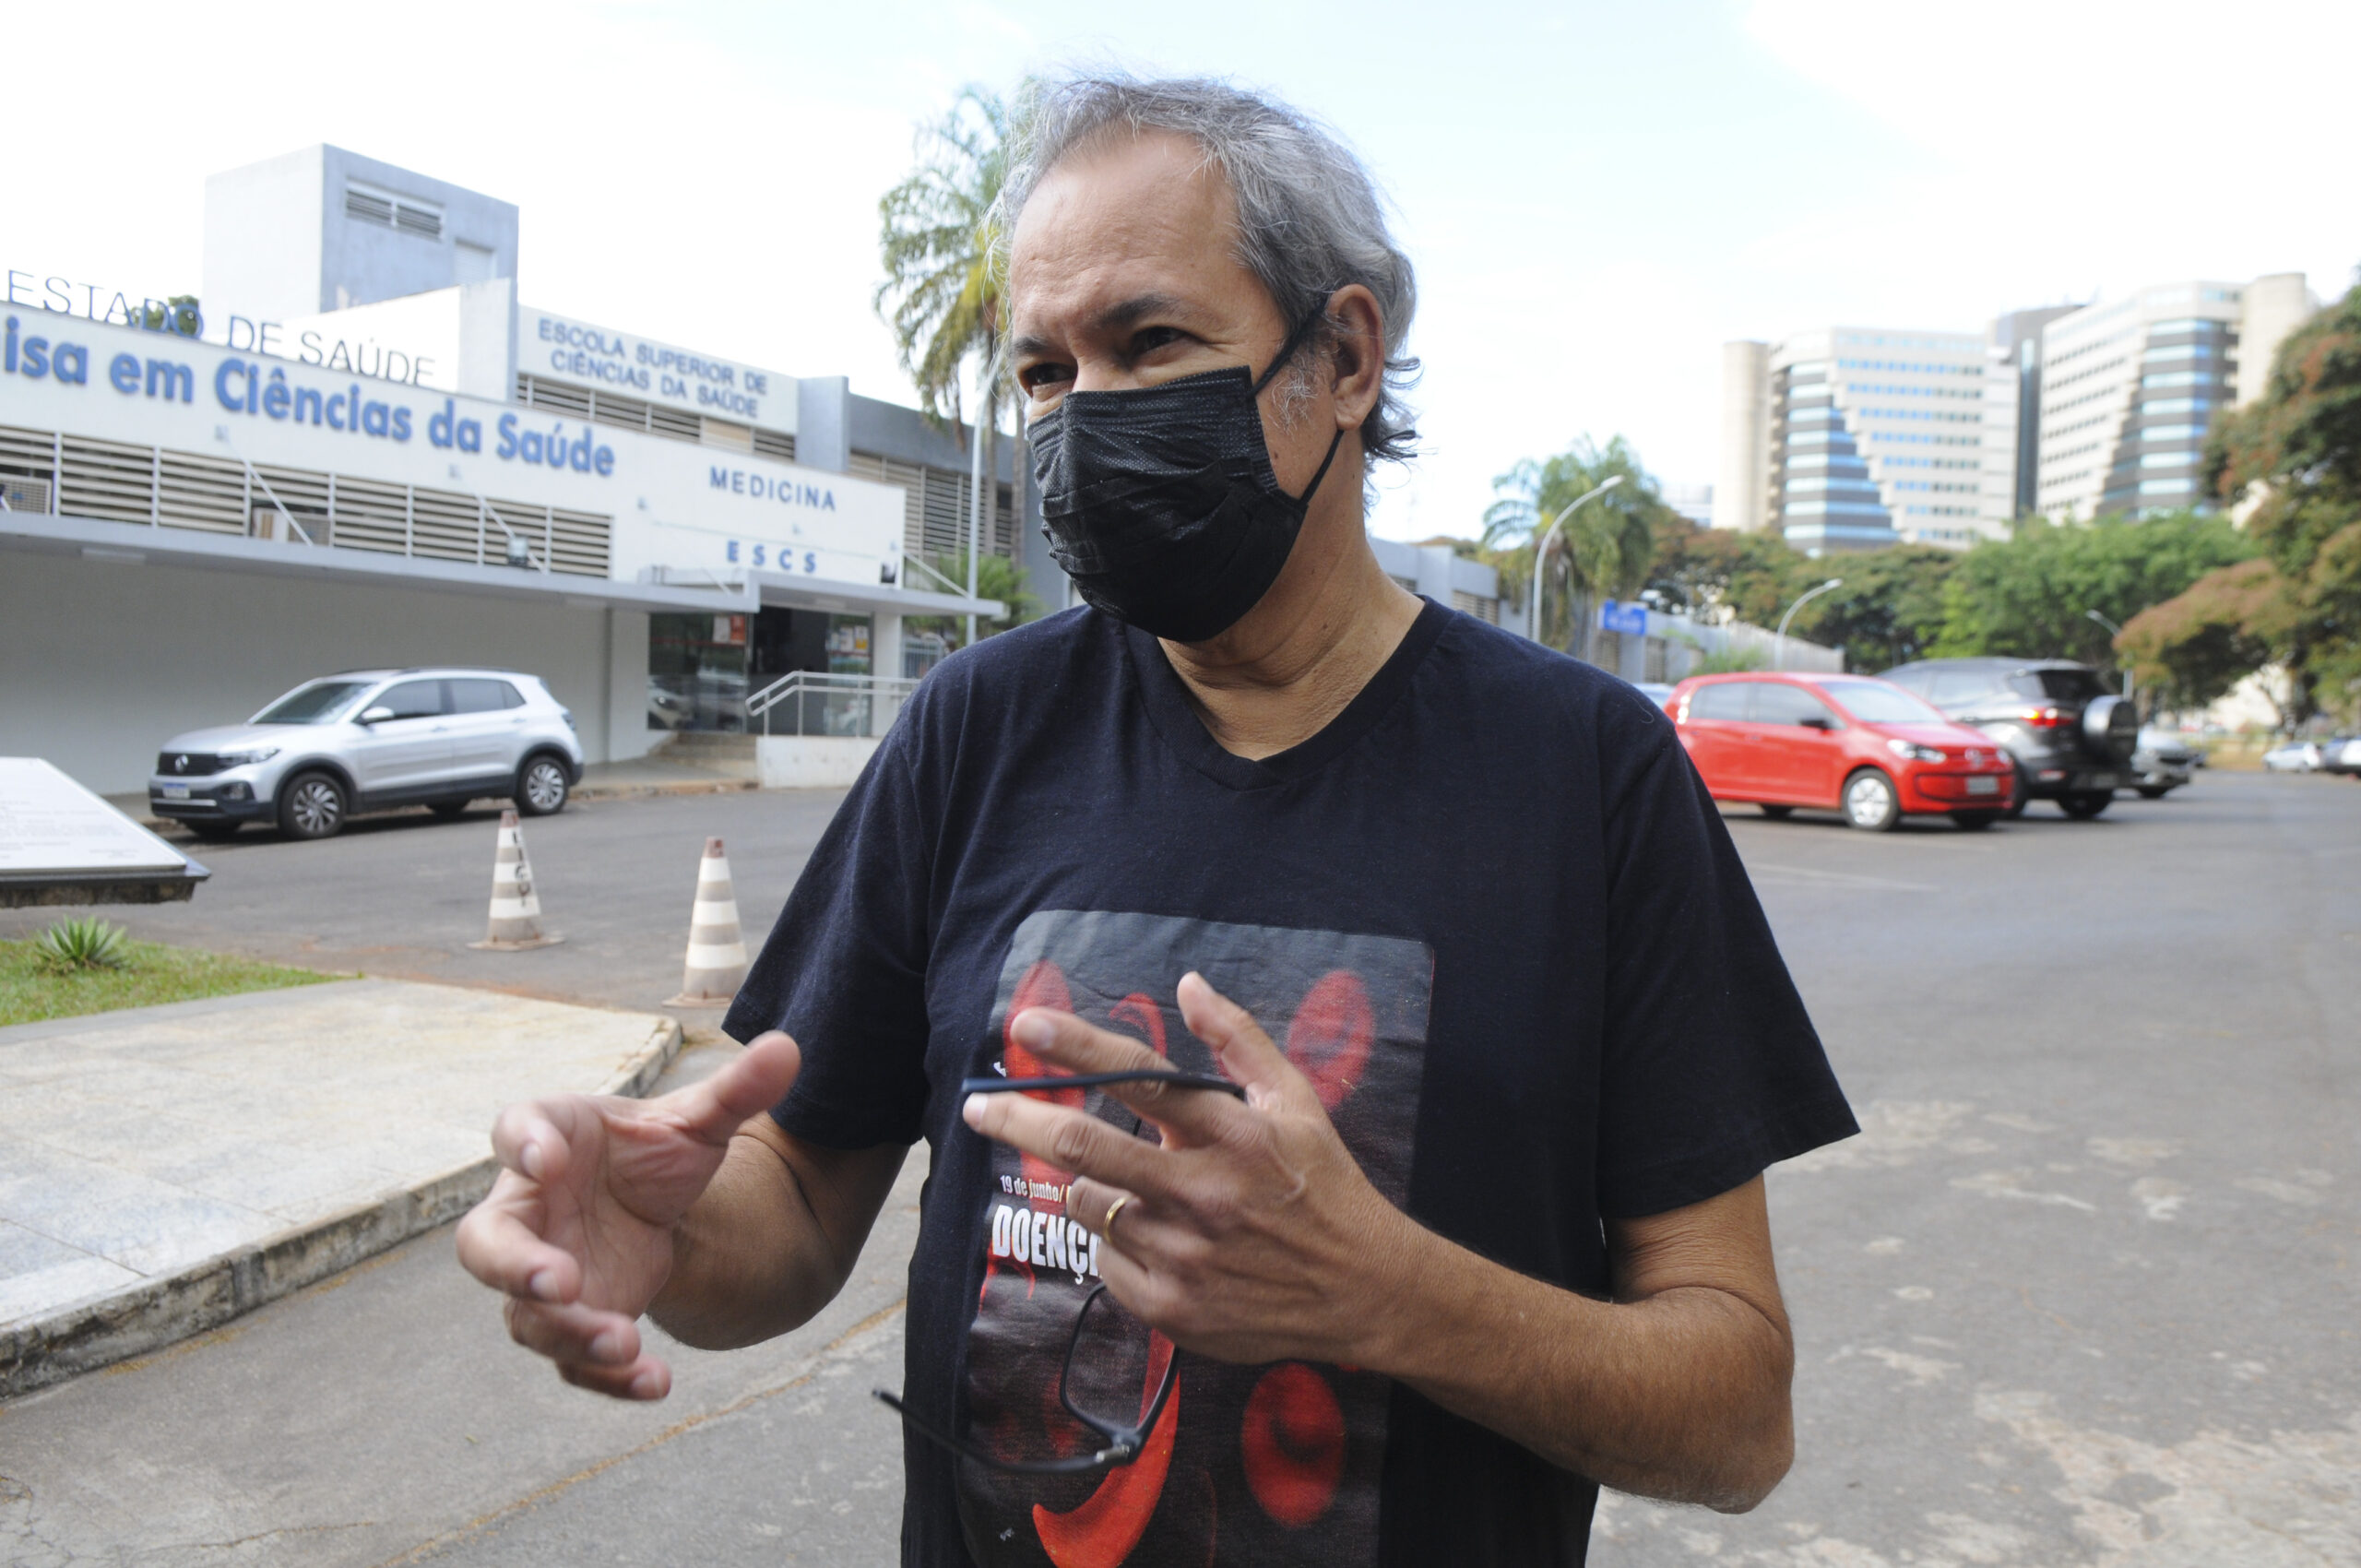 Elvis Magalhães, who coordinates the Brazilian Association of People with Sickle Anemia, was one of the first people in Brazil to be cured |  Photo: Paulo H. Carvalho / Brasilia Agency